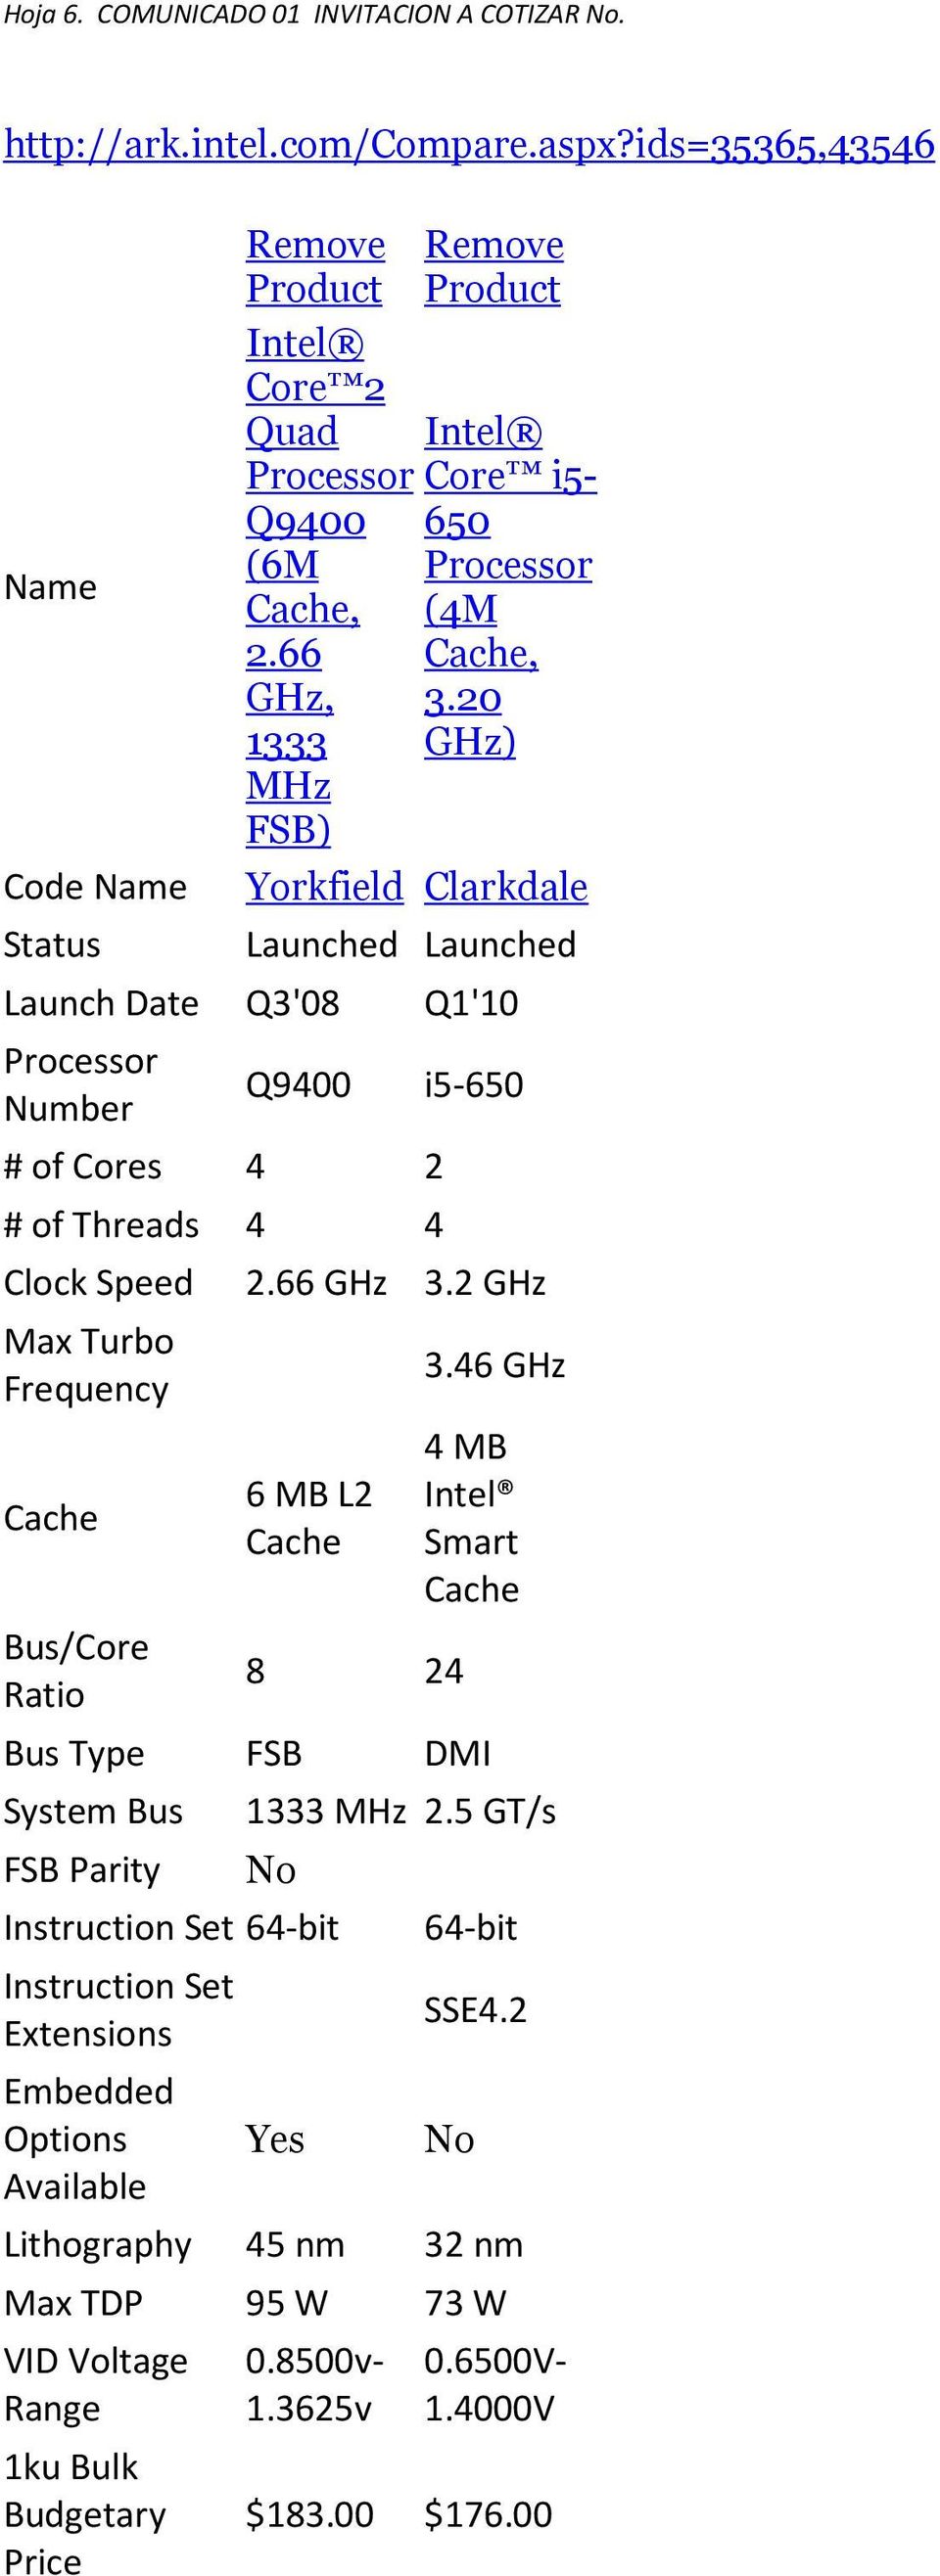 20 1333 GHz) MHz FSB) Code Name Yorkfield Clarkdale Status Launch Date Q3'08 Processor Number Launched Launched Q1'10 Q9400 i5-650 # of Cores 4 2 # of Threads 4 4 Clock Speed 2.66 GHz 3.